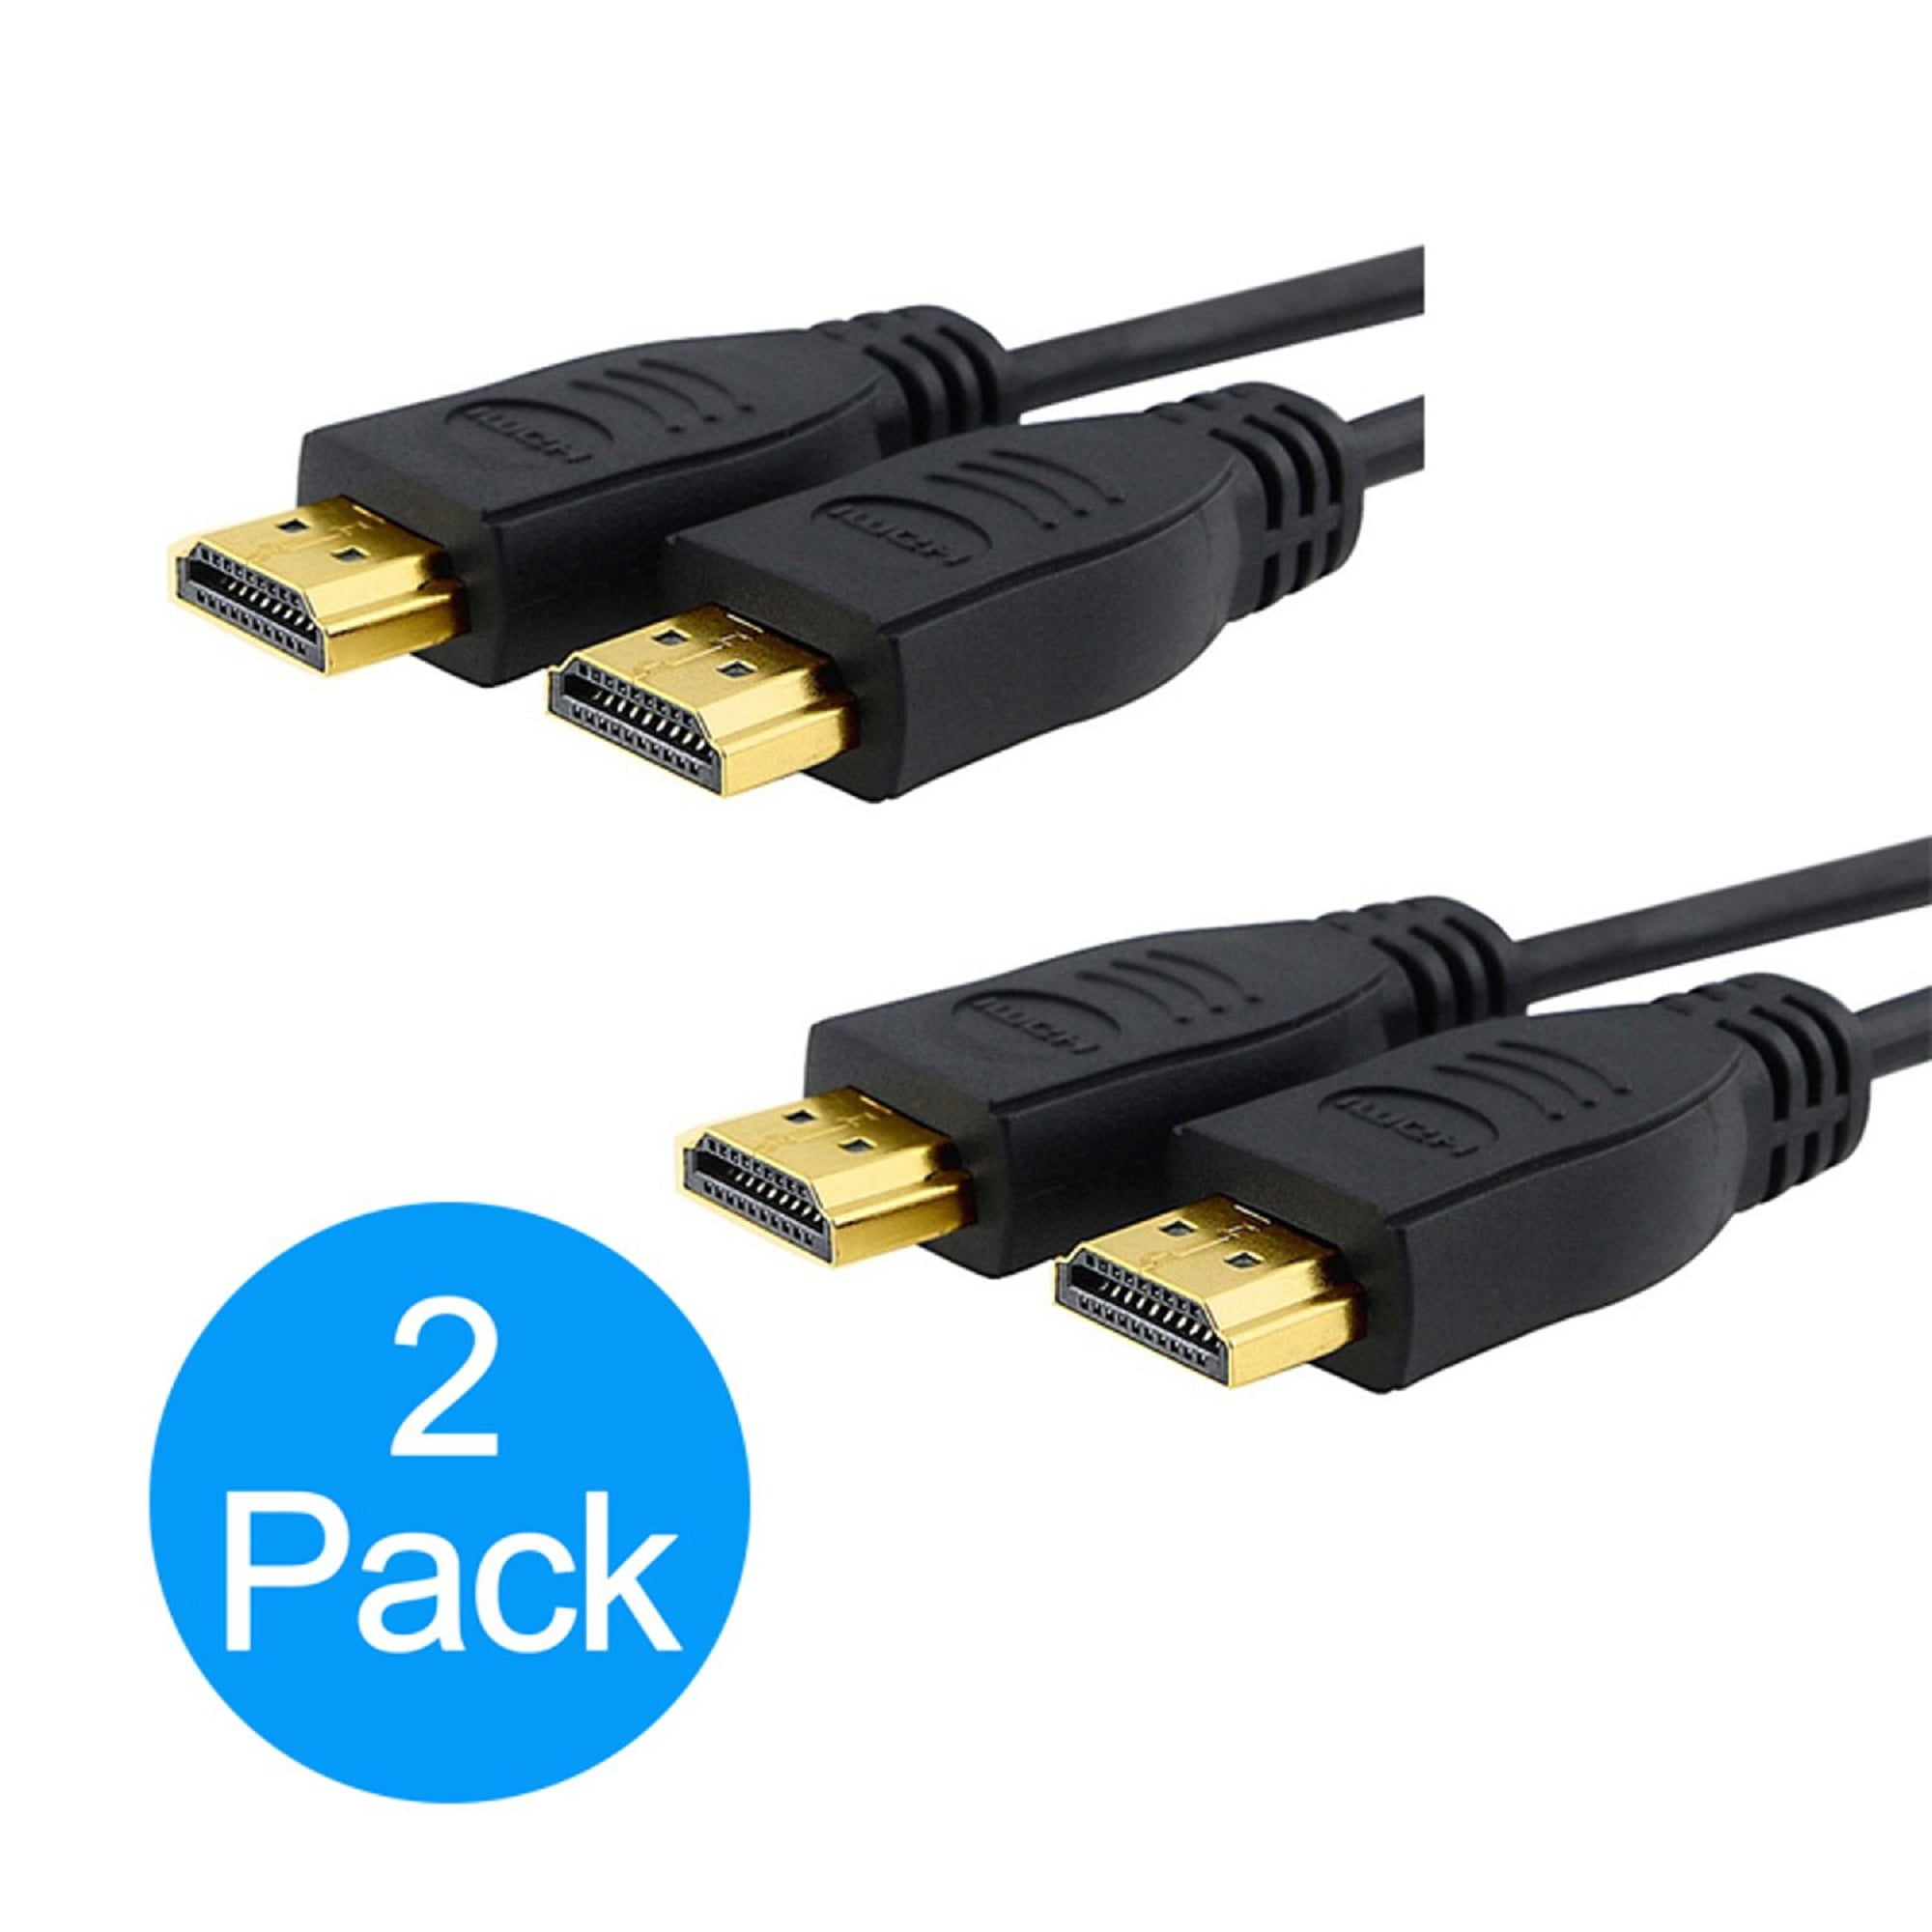 -6ft with Gold Plated Corrosion 2 Pack High-Speed HDMI Cable 